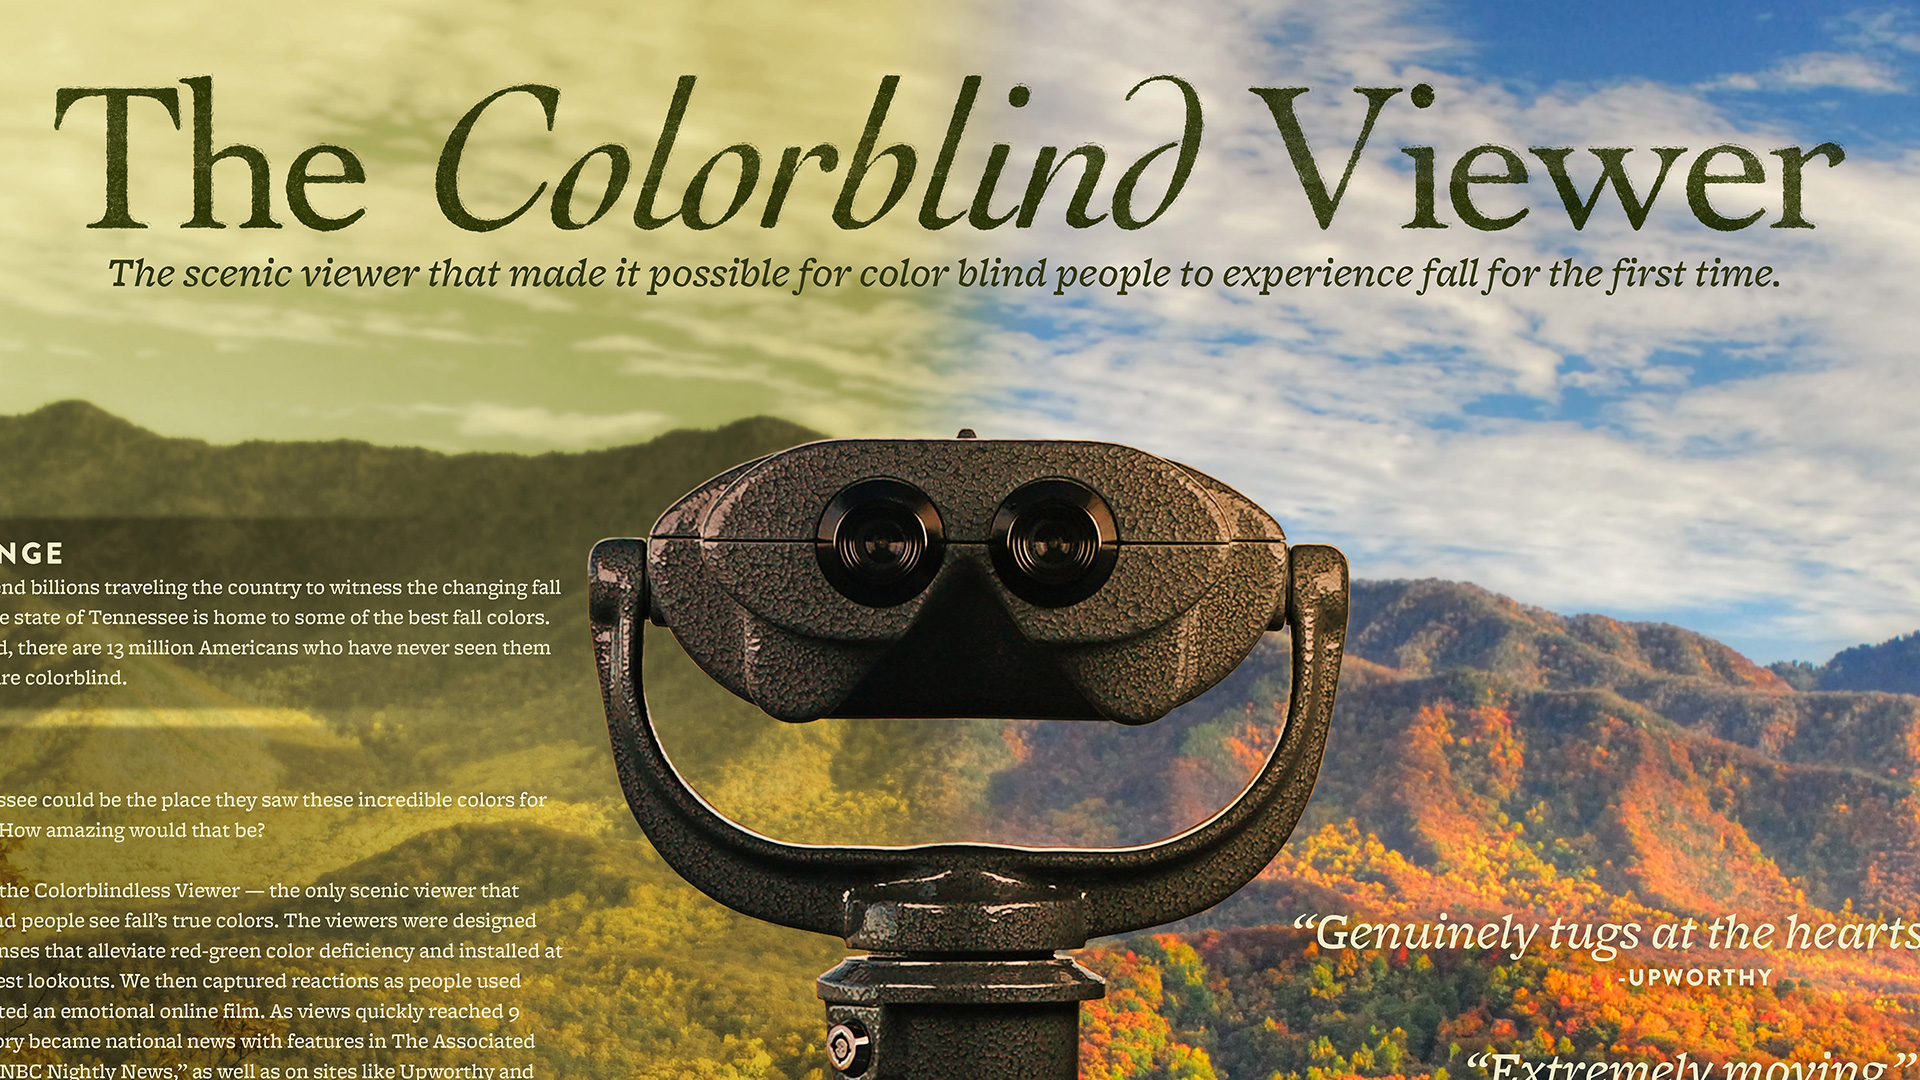 The Colorblind Viewer